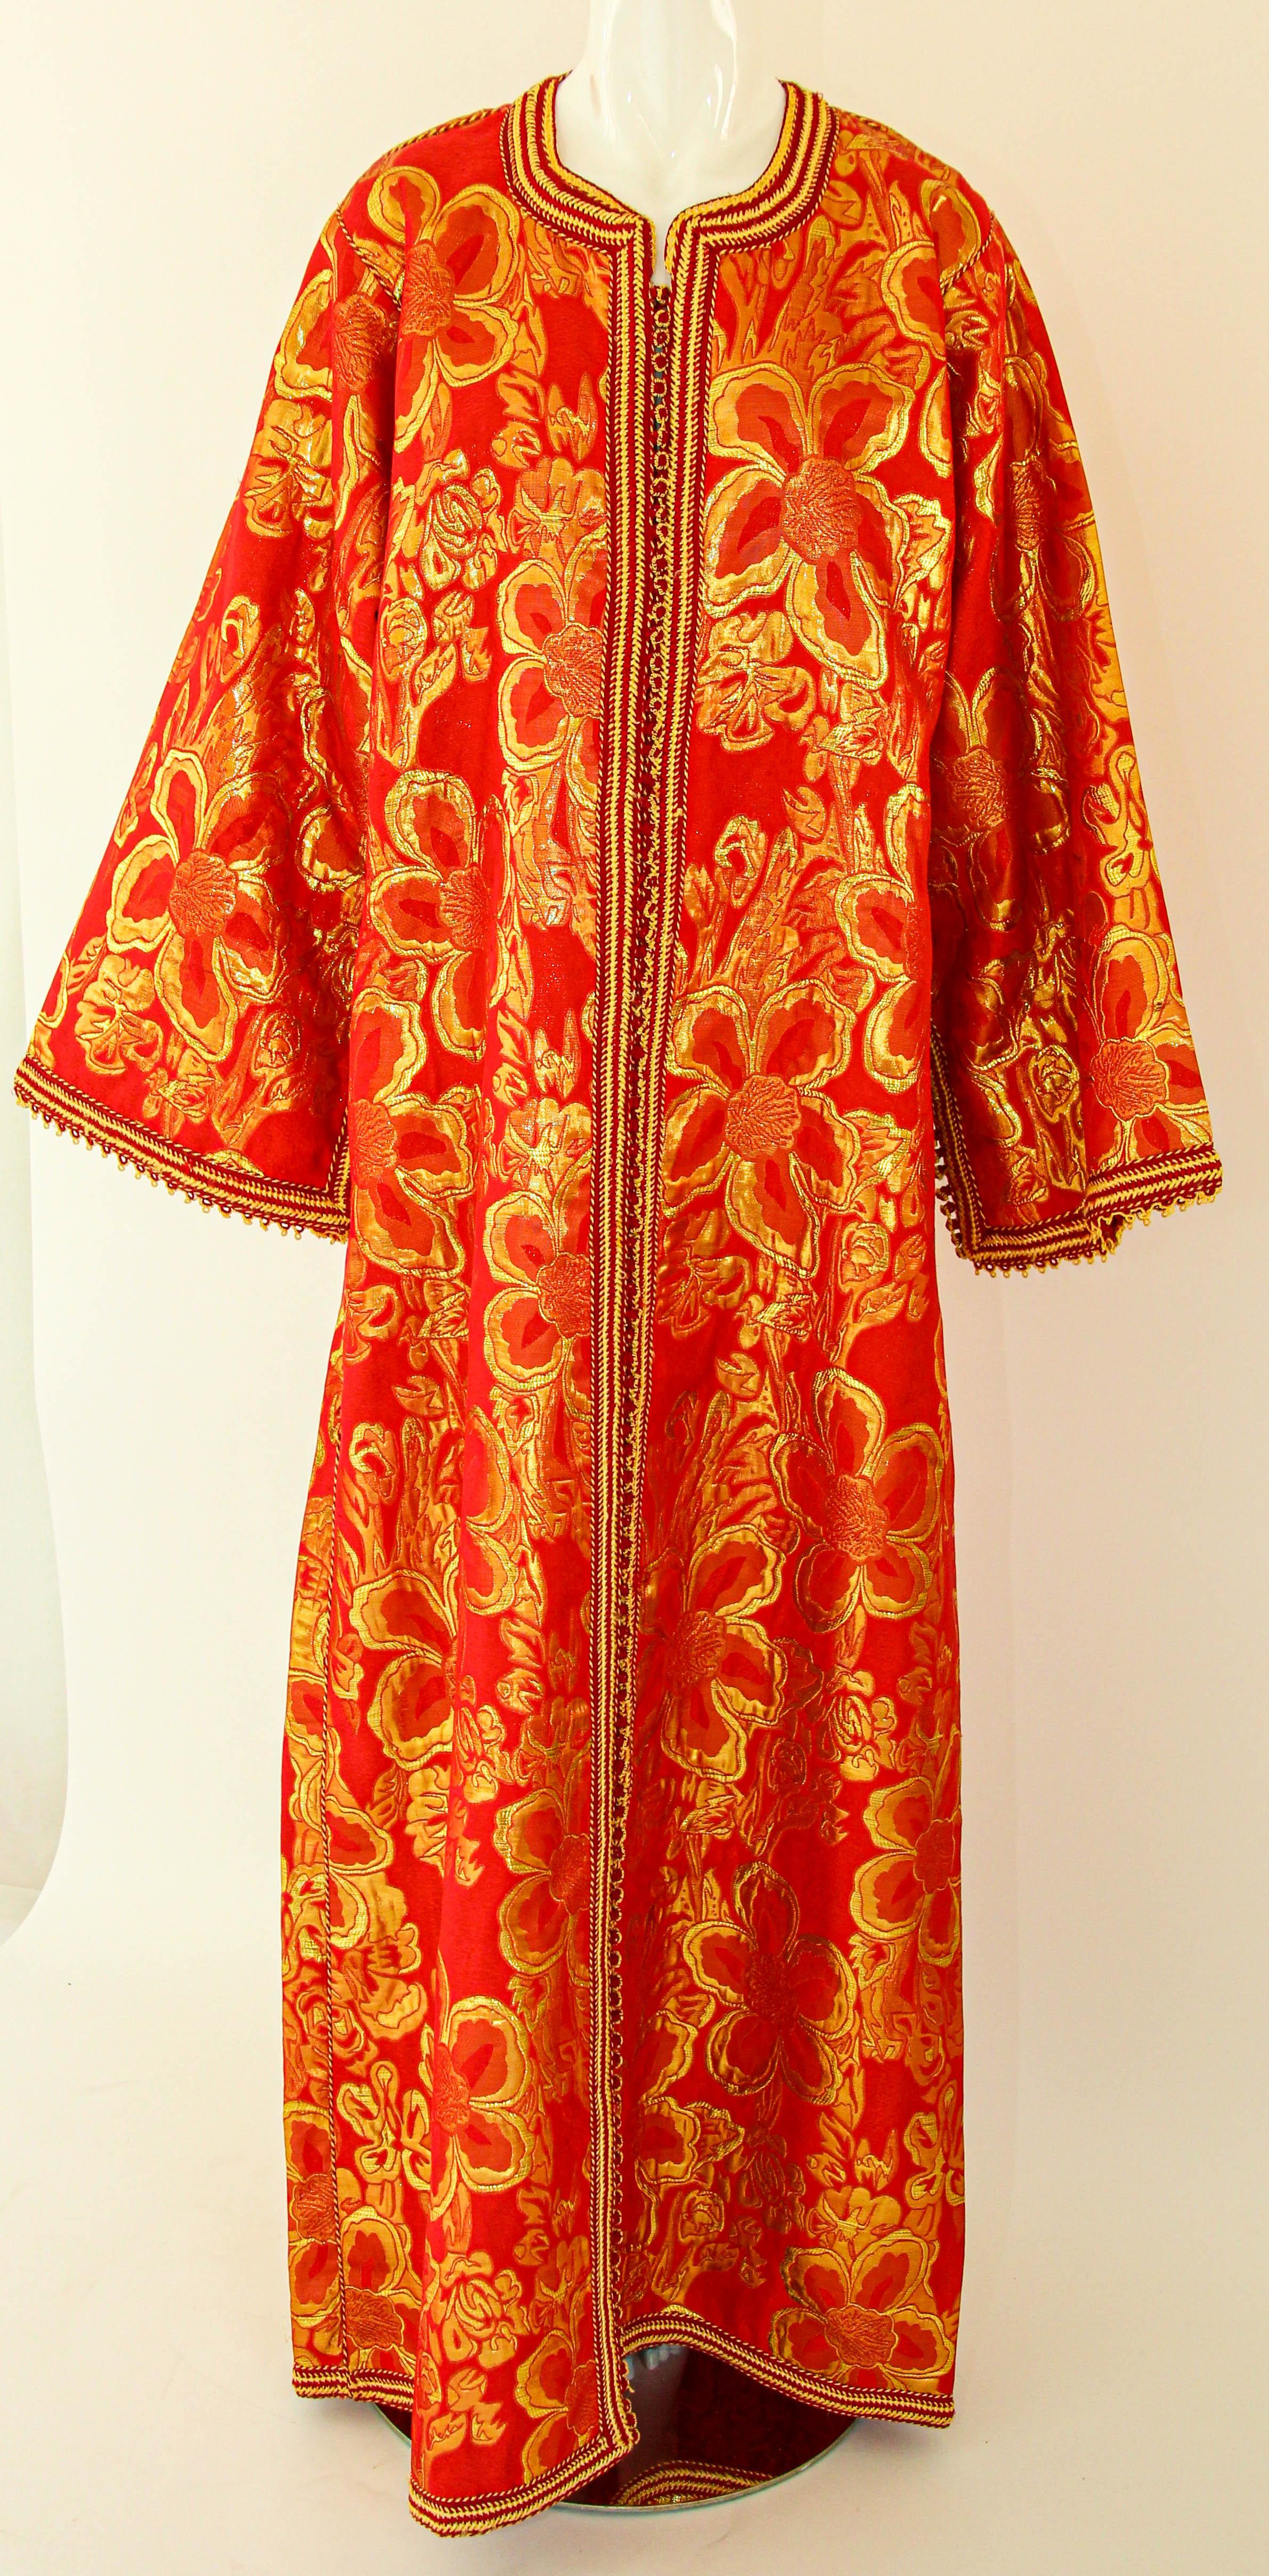 1970s Vintage Moroccan Kaftan Red and Gold Brocade Caftan Maxi Dress In Good Condition For Sale In North Hollywood, CA